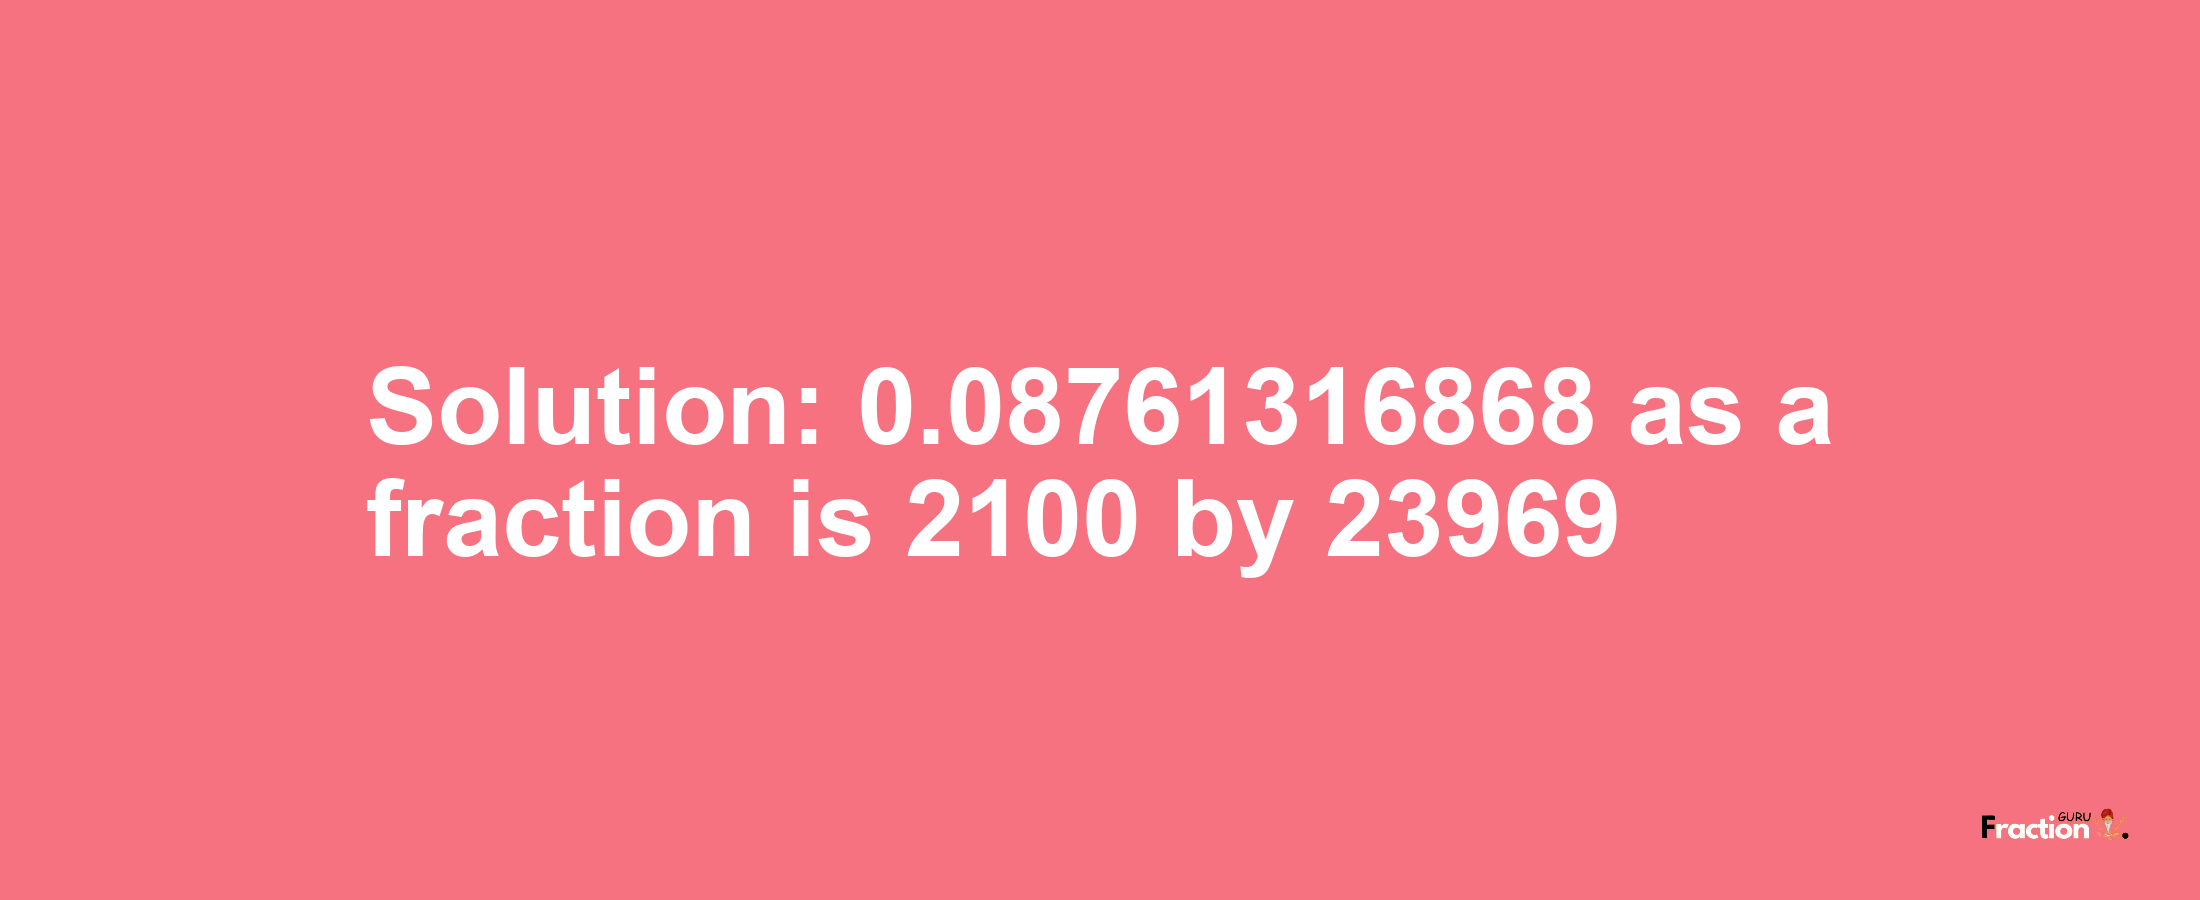 Solution:0.08761316868 as a fraction is 2100/23969